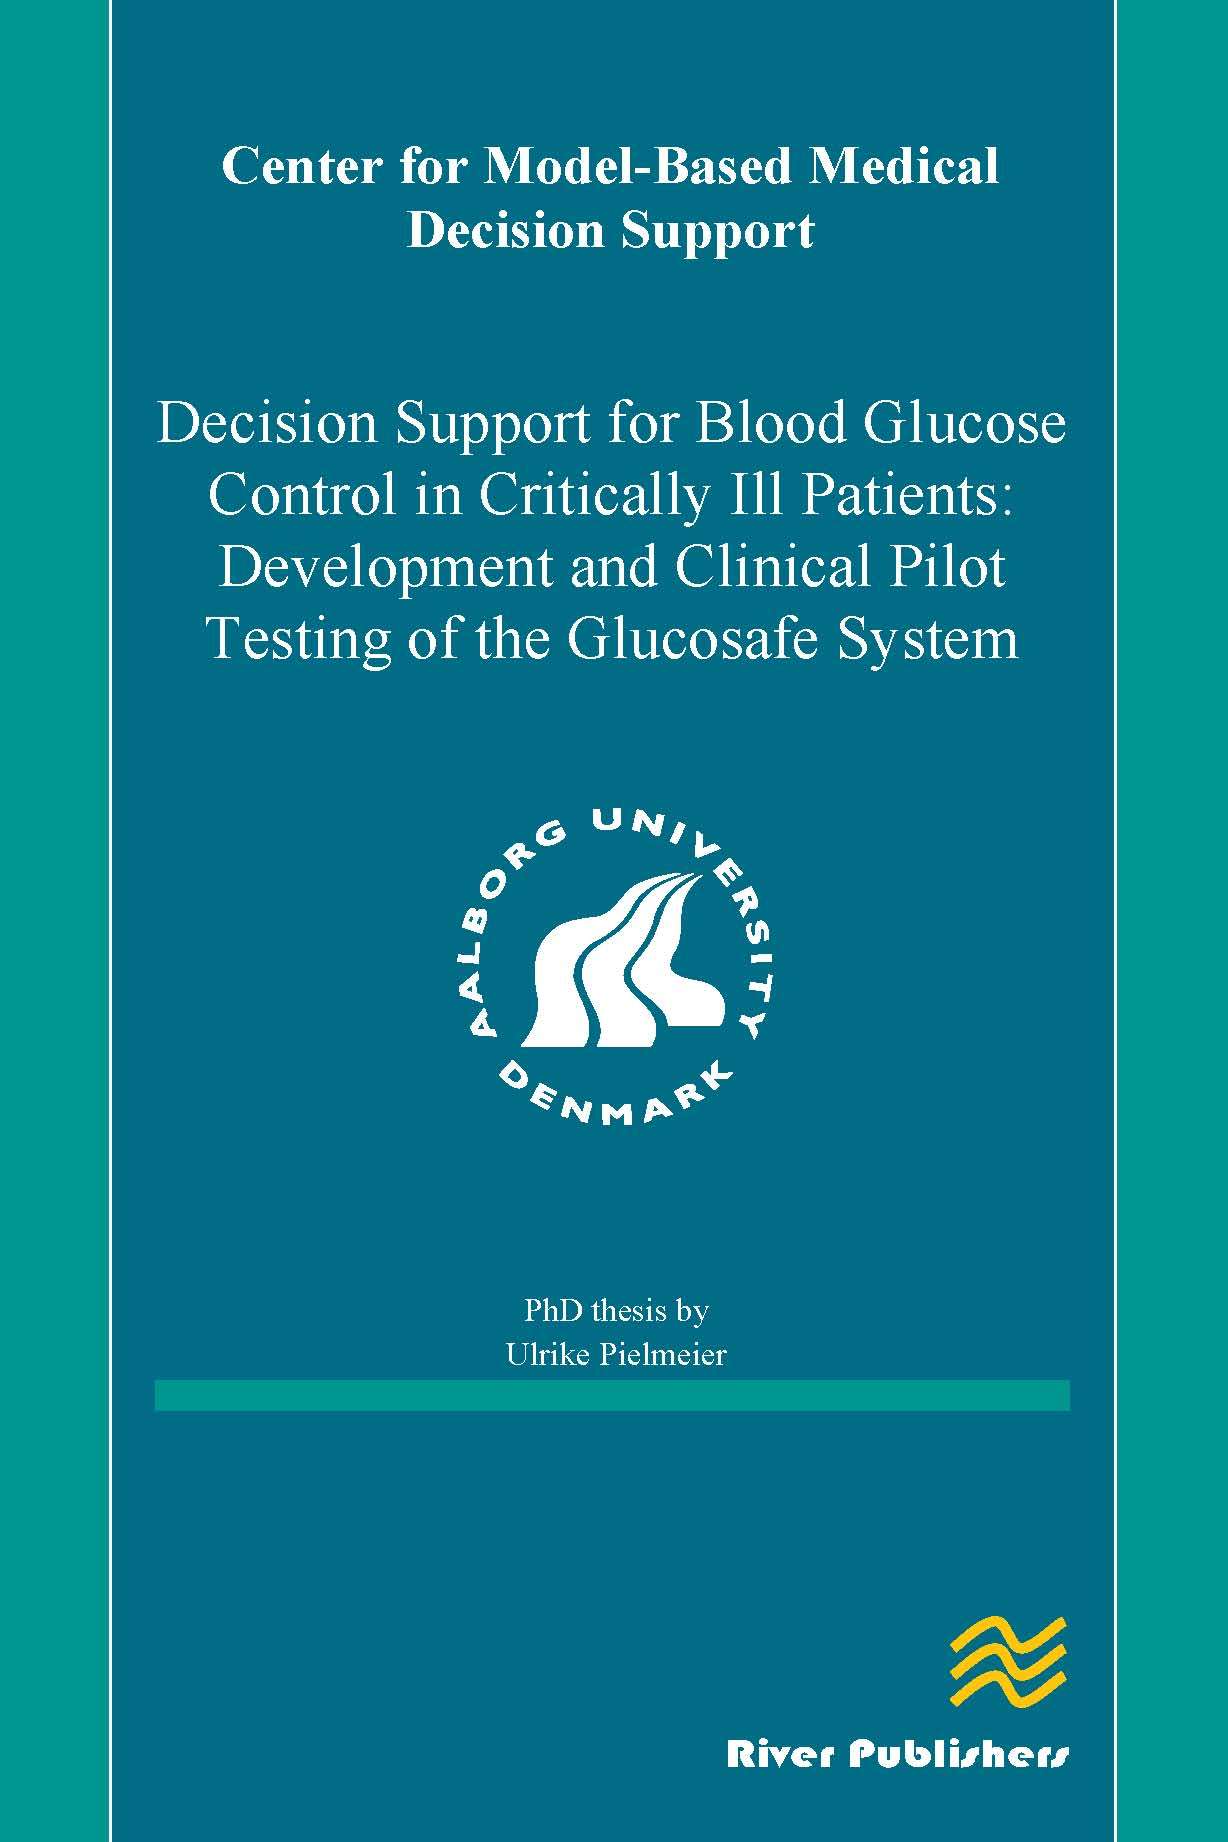 Decision Support for Blood Glucose Control in Critically Ill Patients